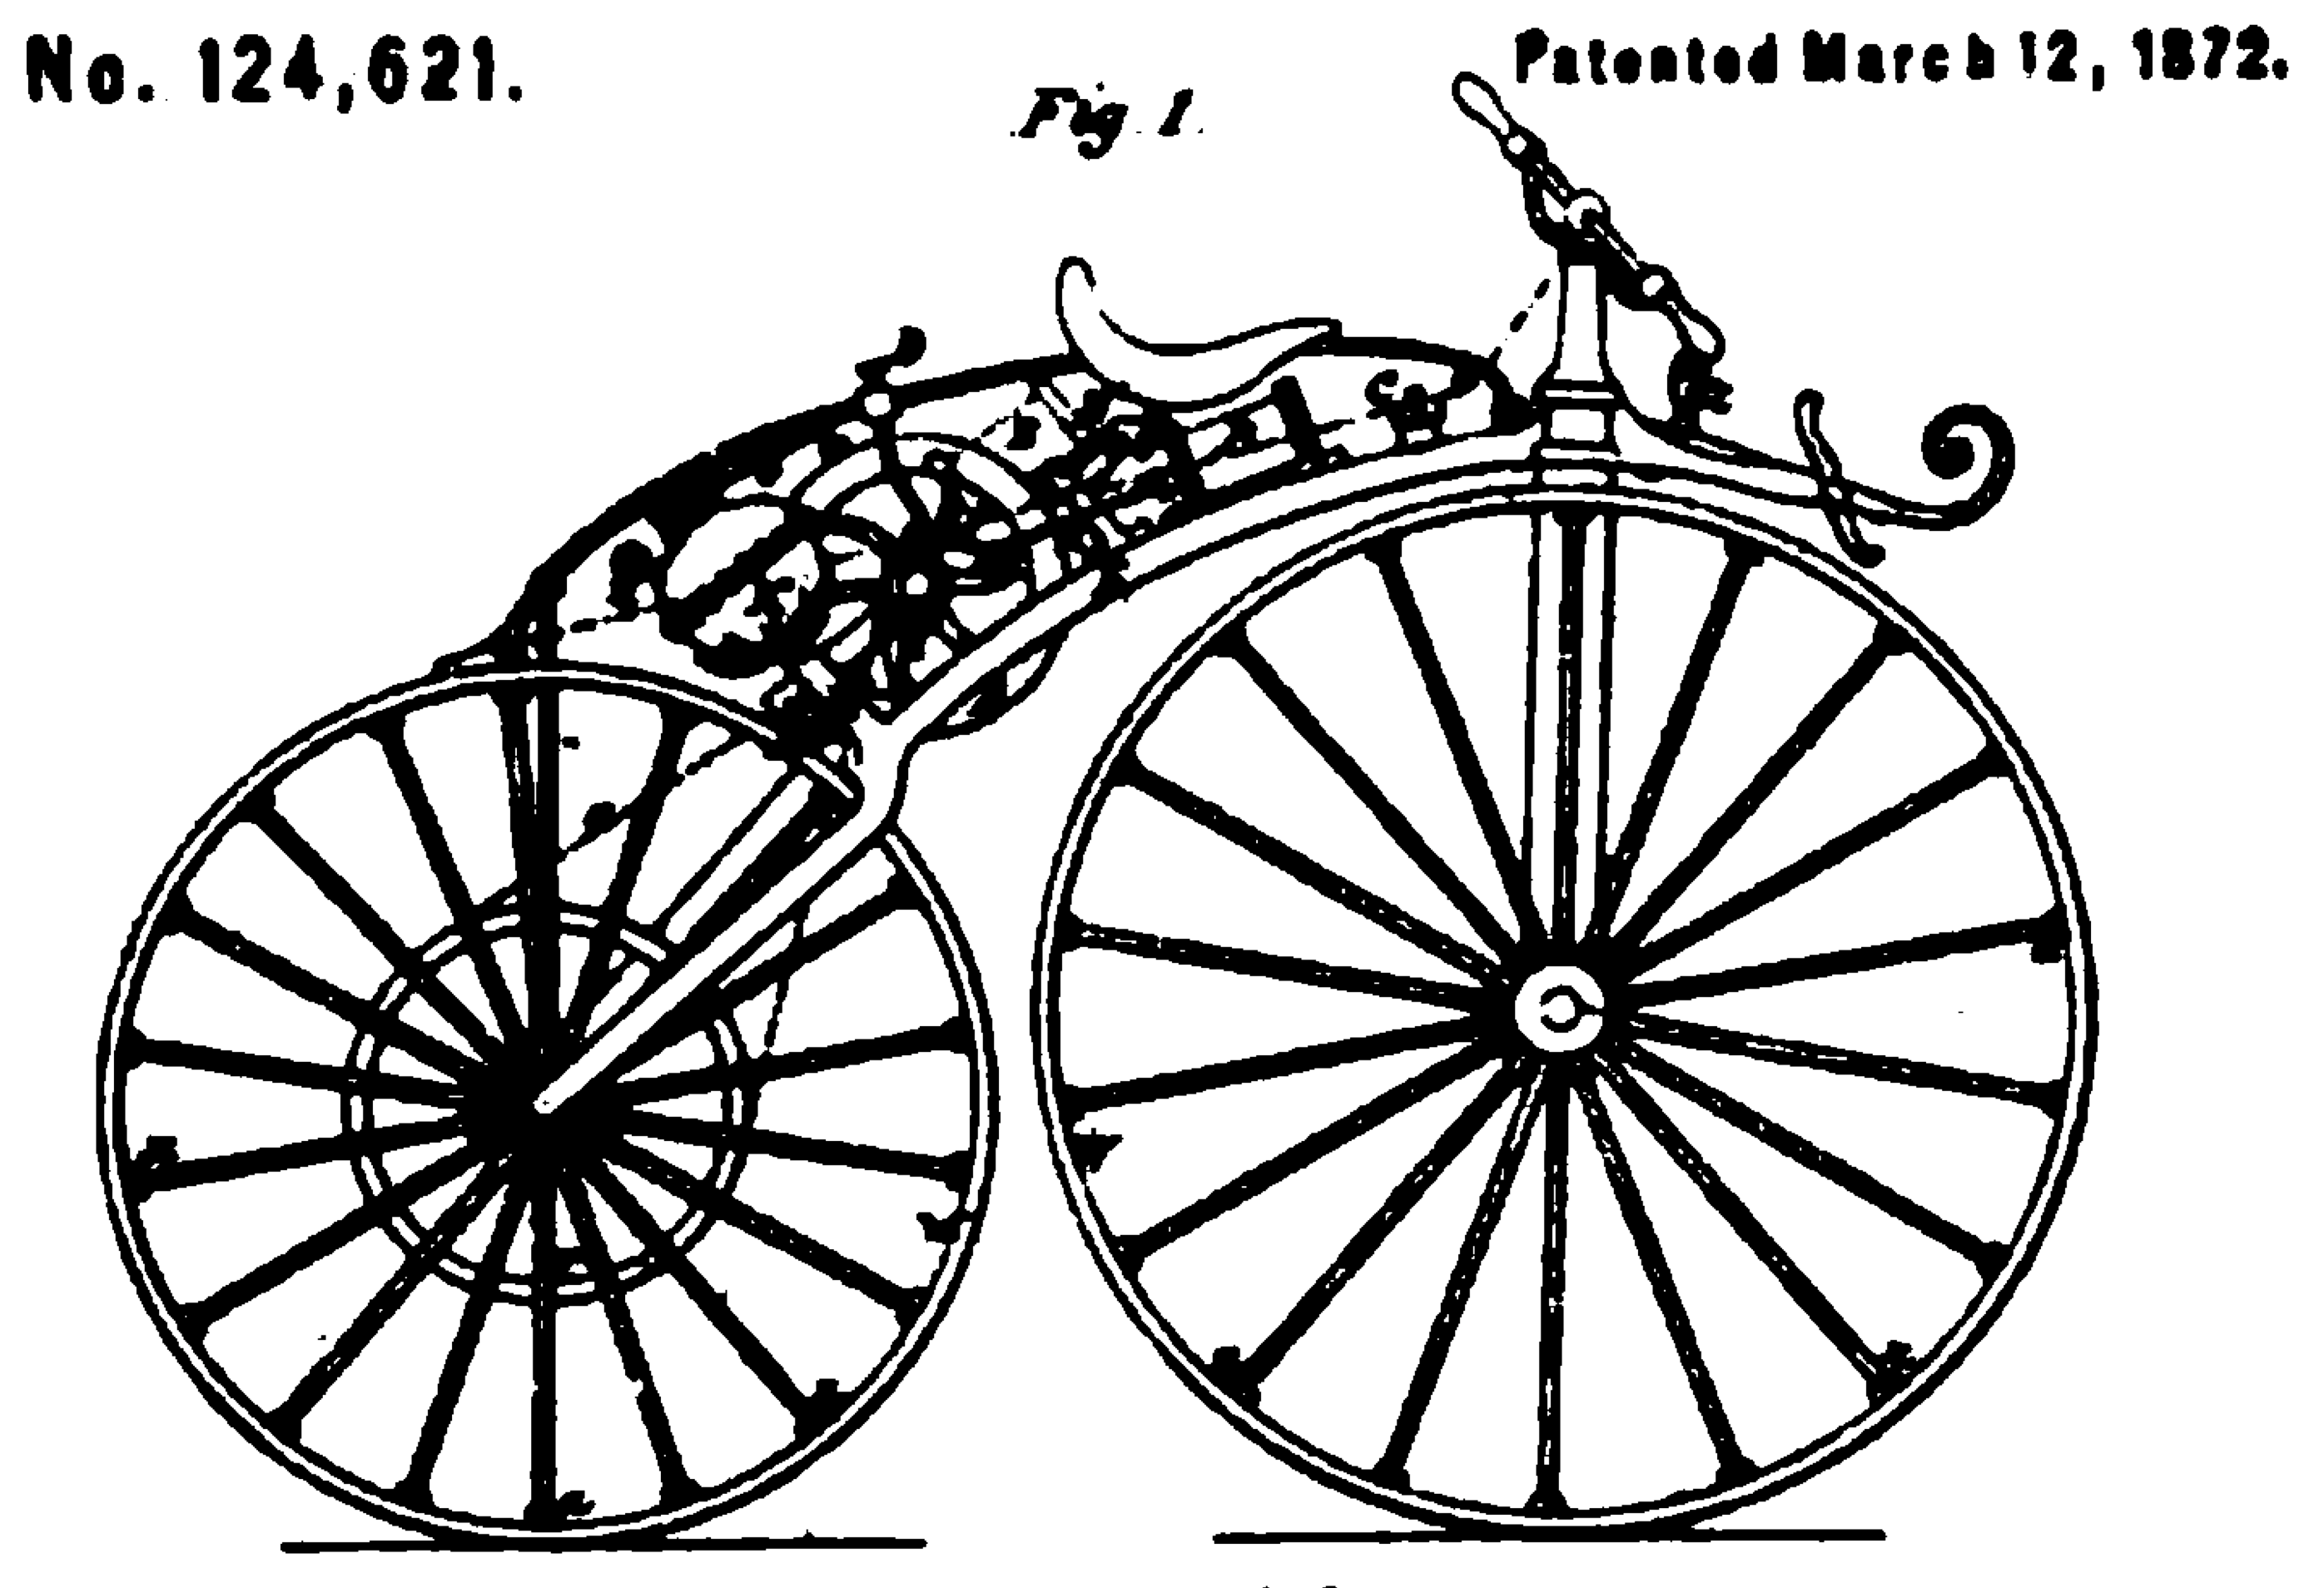 patents and designs